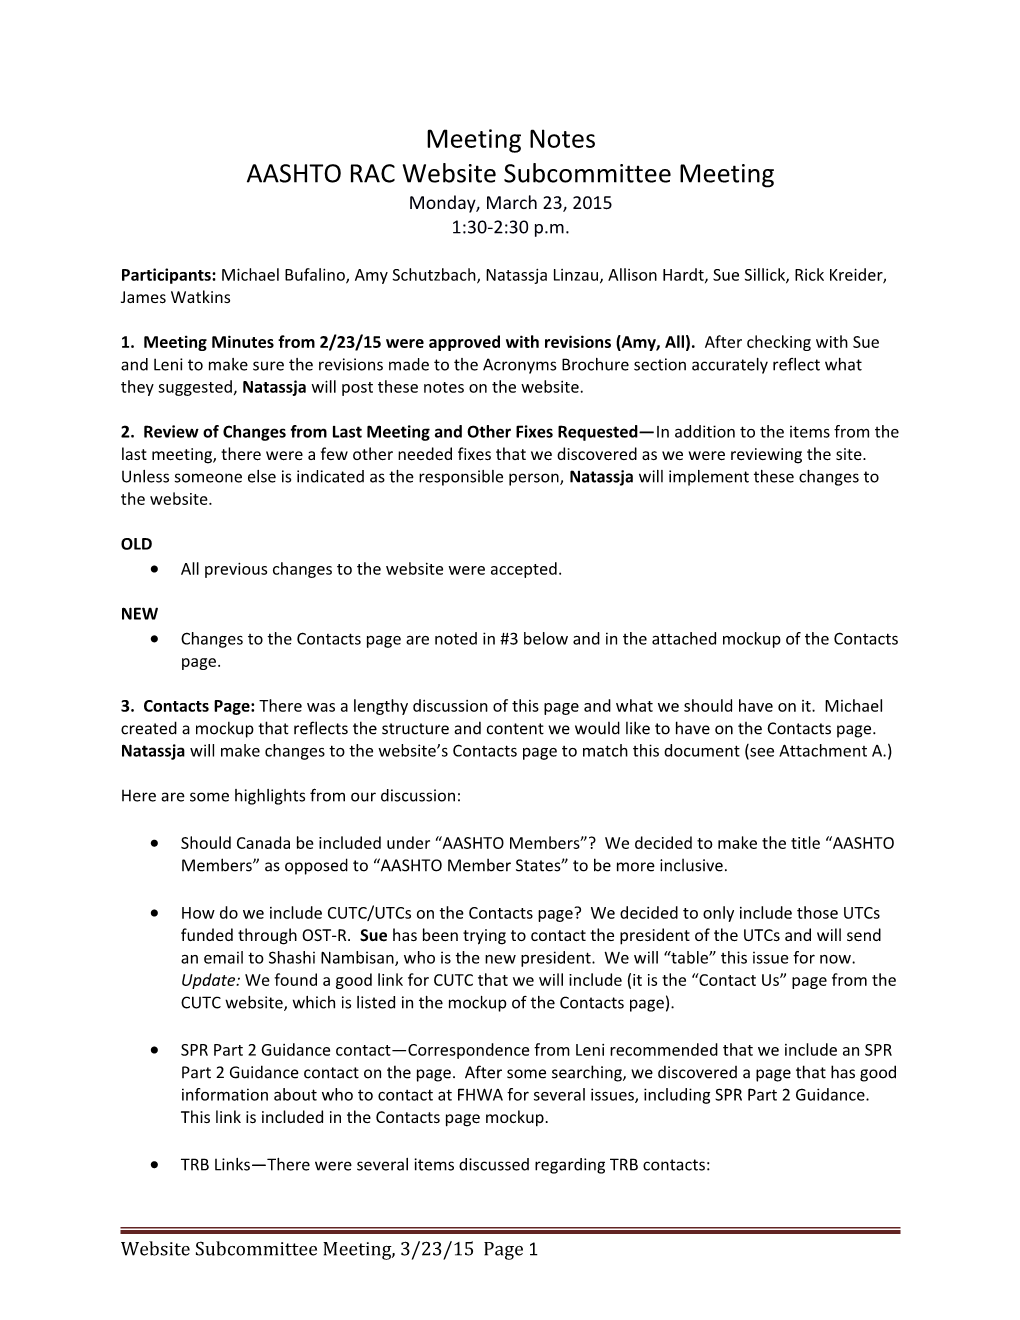 Website Subcommittee Meeting Notes: March 23, 2015